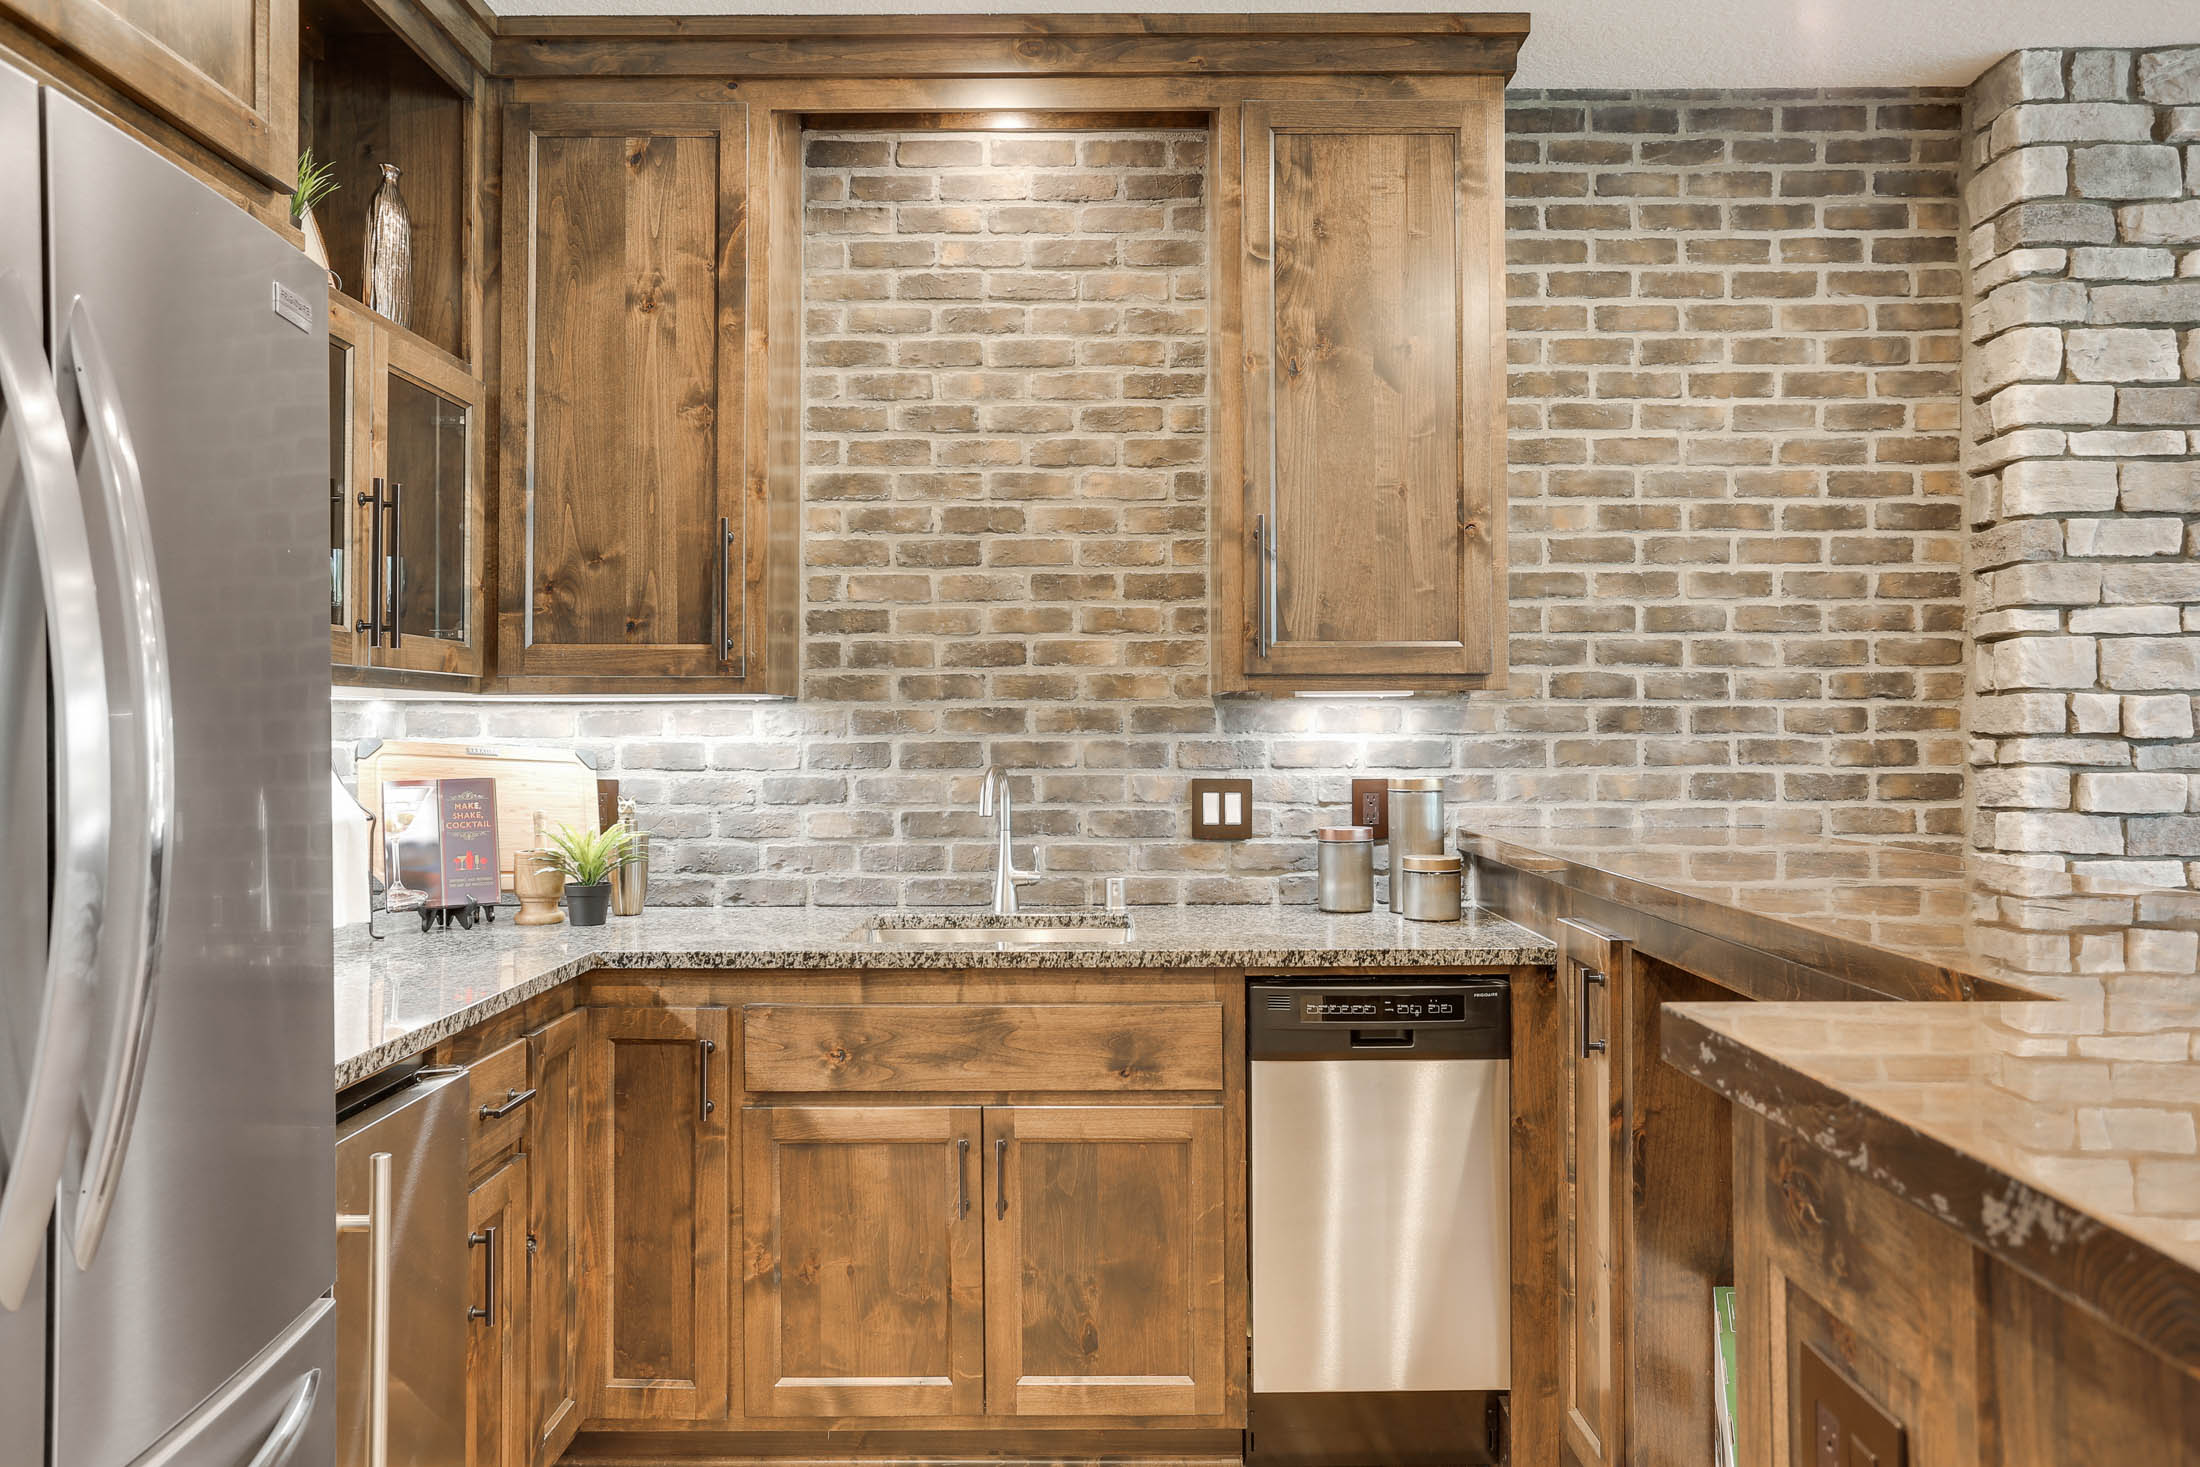 Brick and stone walls and custom rustic wood cabinets